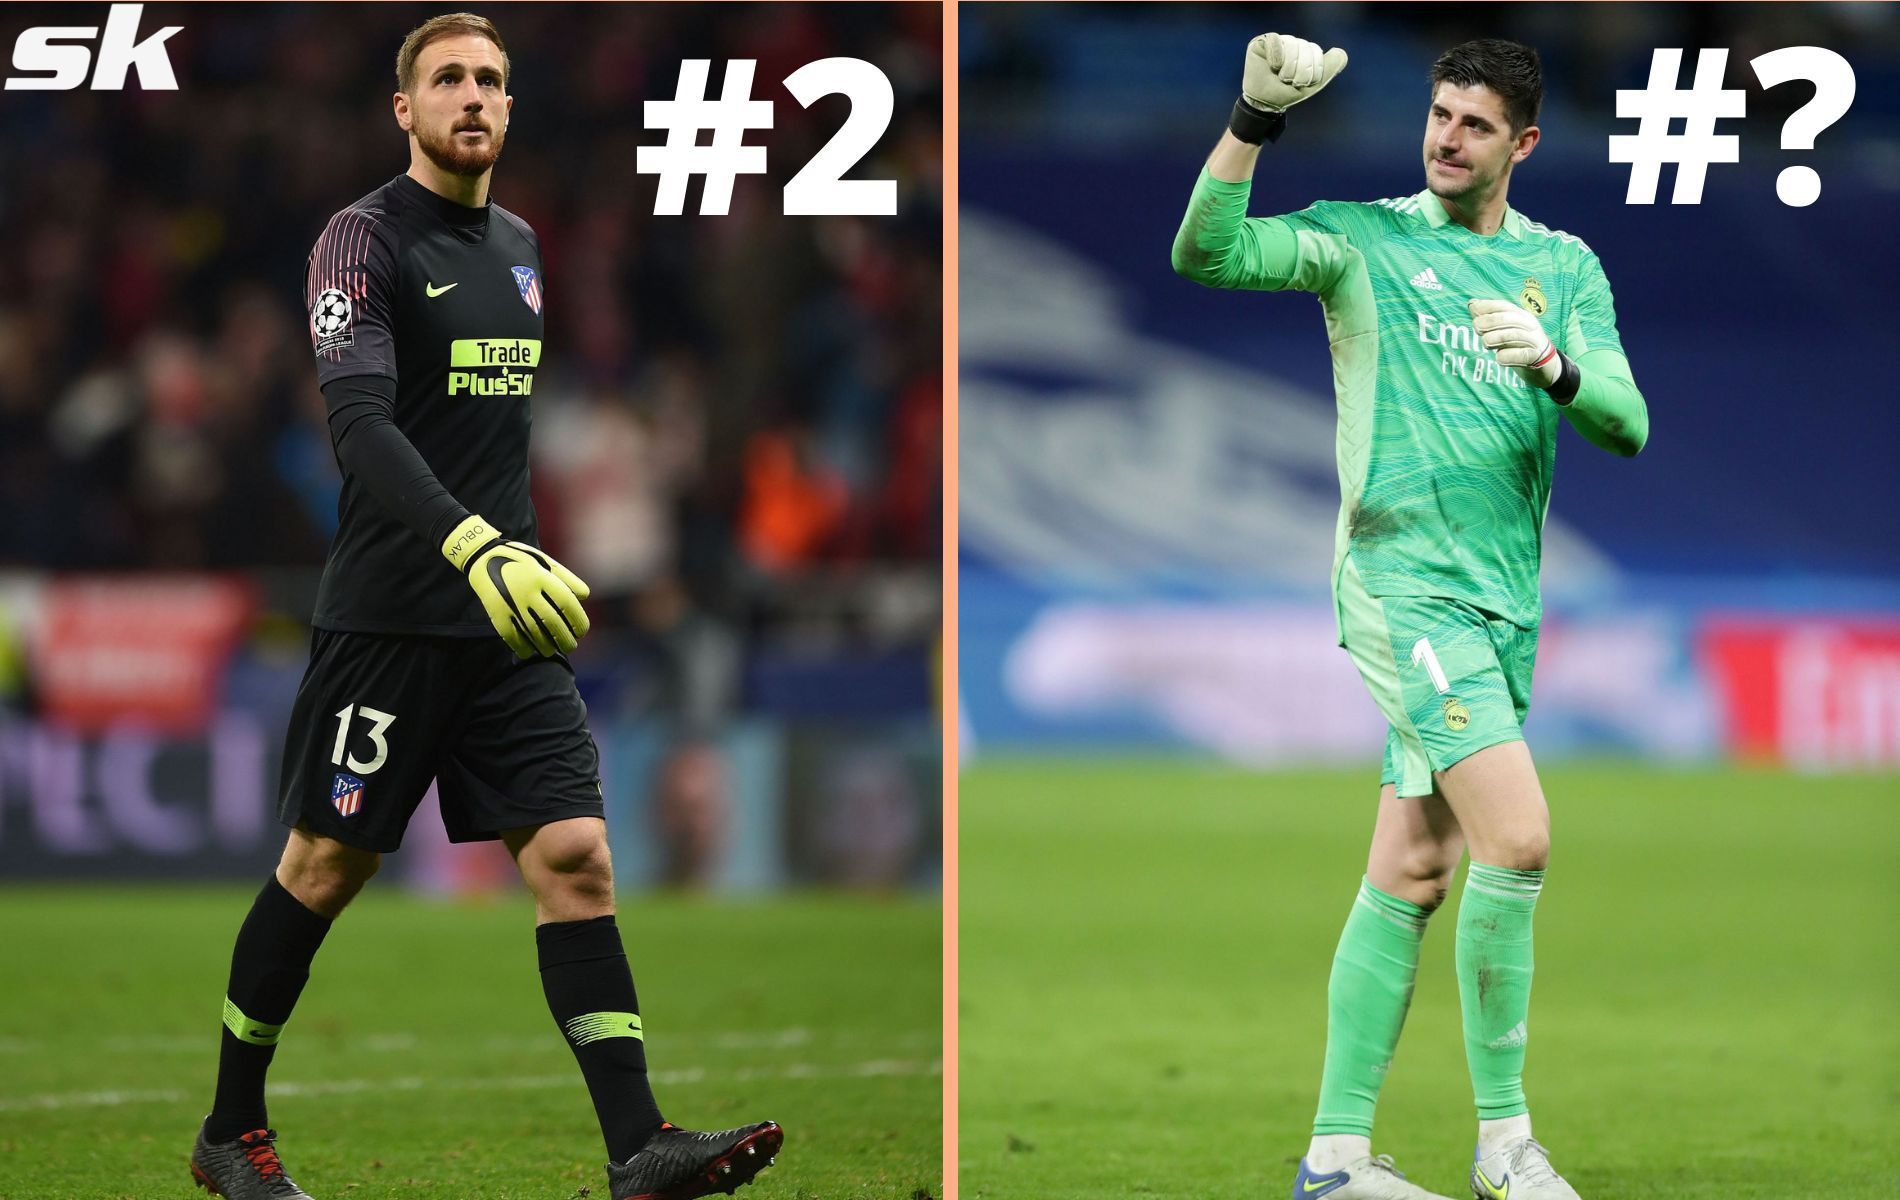 Jan Oblak and Thibaut Courtois have been two of the best goalkeepers in La Liga in 2021